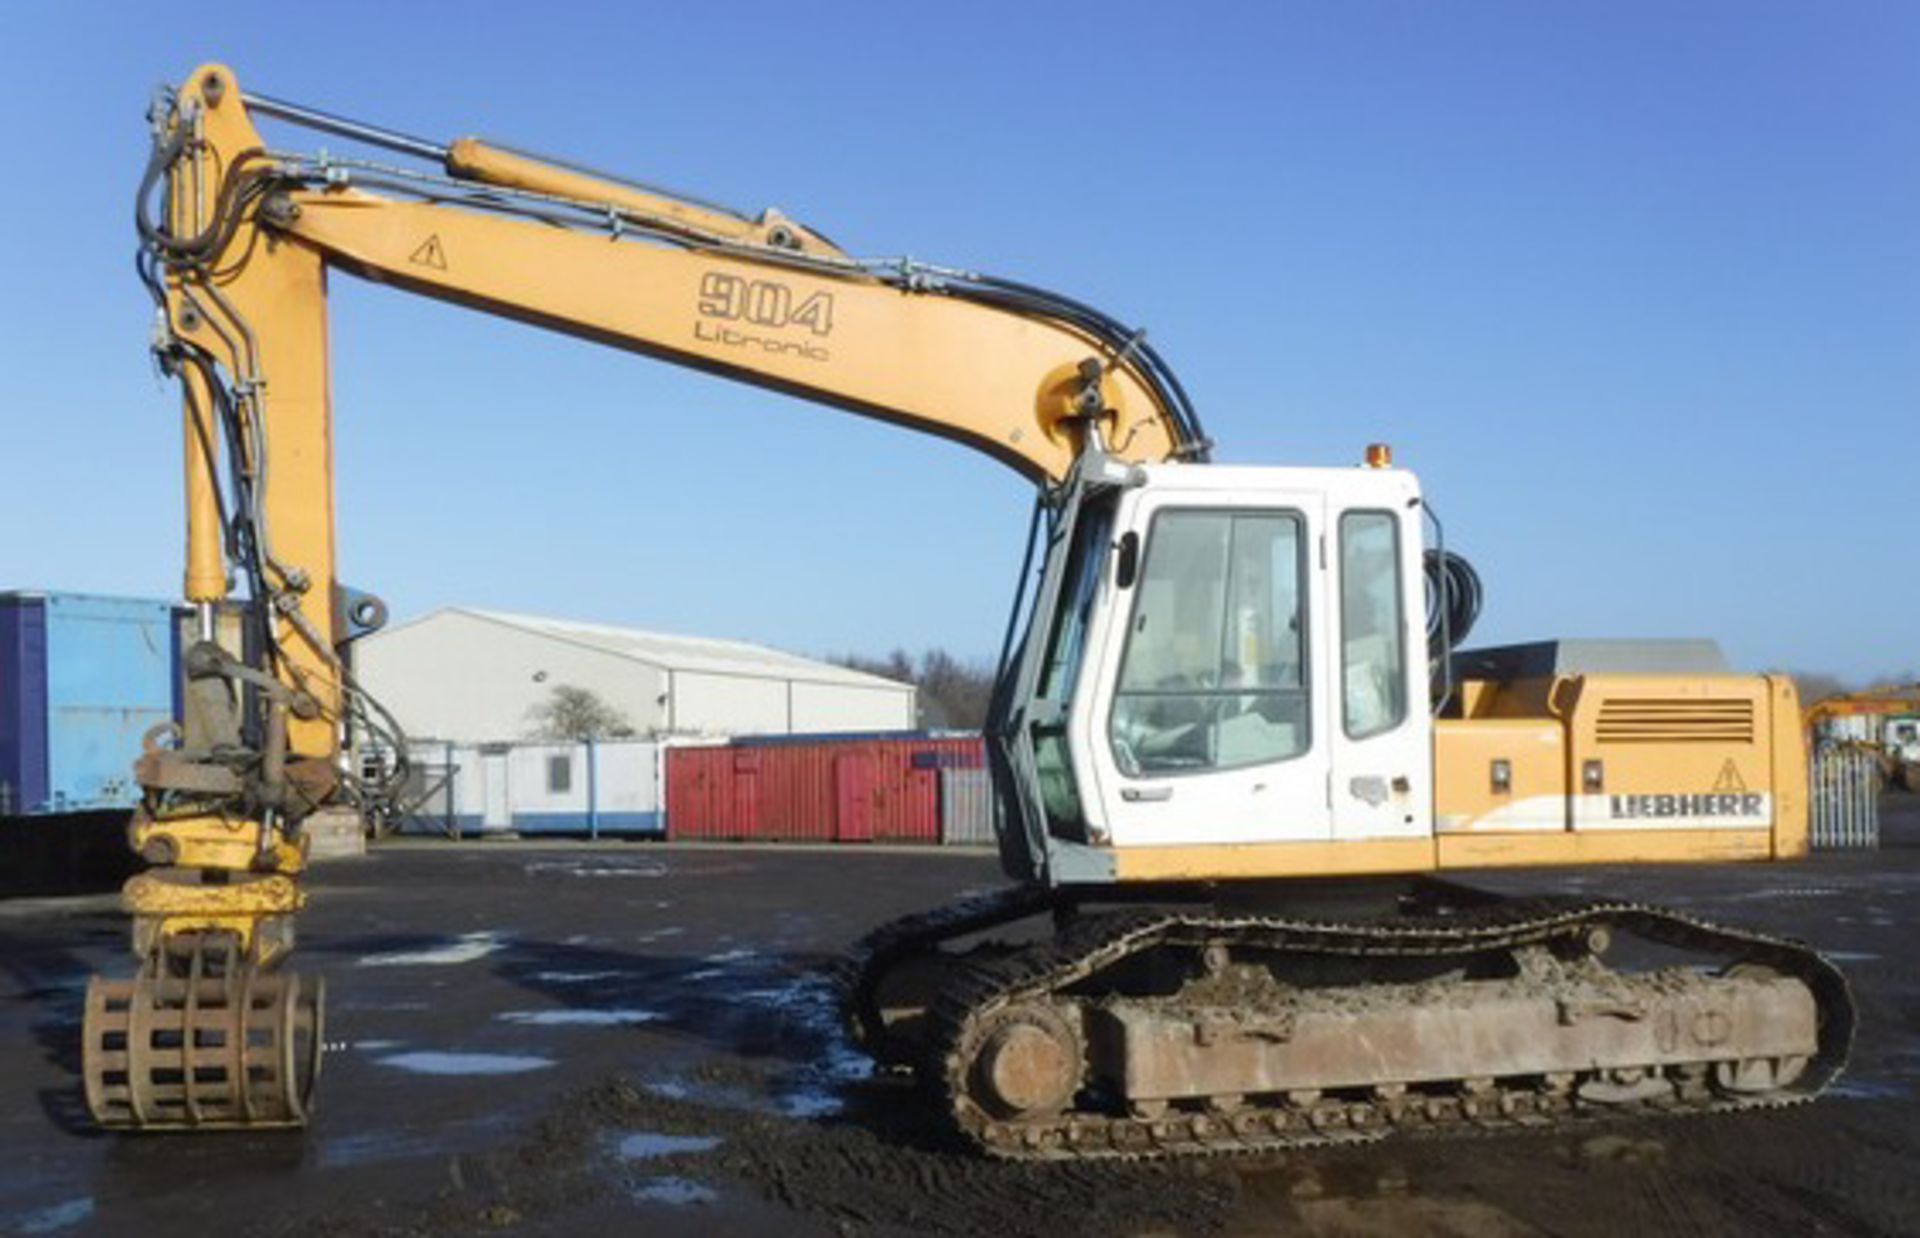 2004 LIEBHERR R-904, S/N 668-12514, 8364HRS (NOT VERIFIED), ENGCON GRAB, MAX REACH 8.4M, FITTED WITH - Image 17 of 18